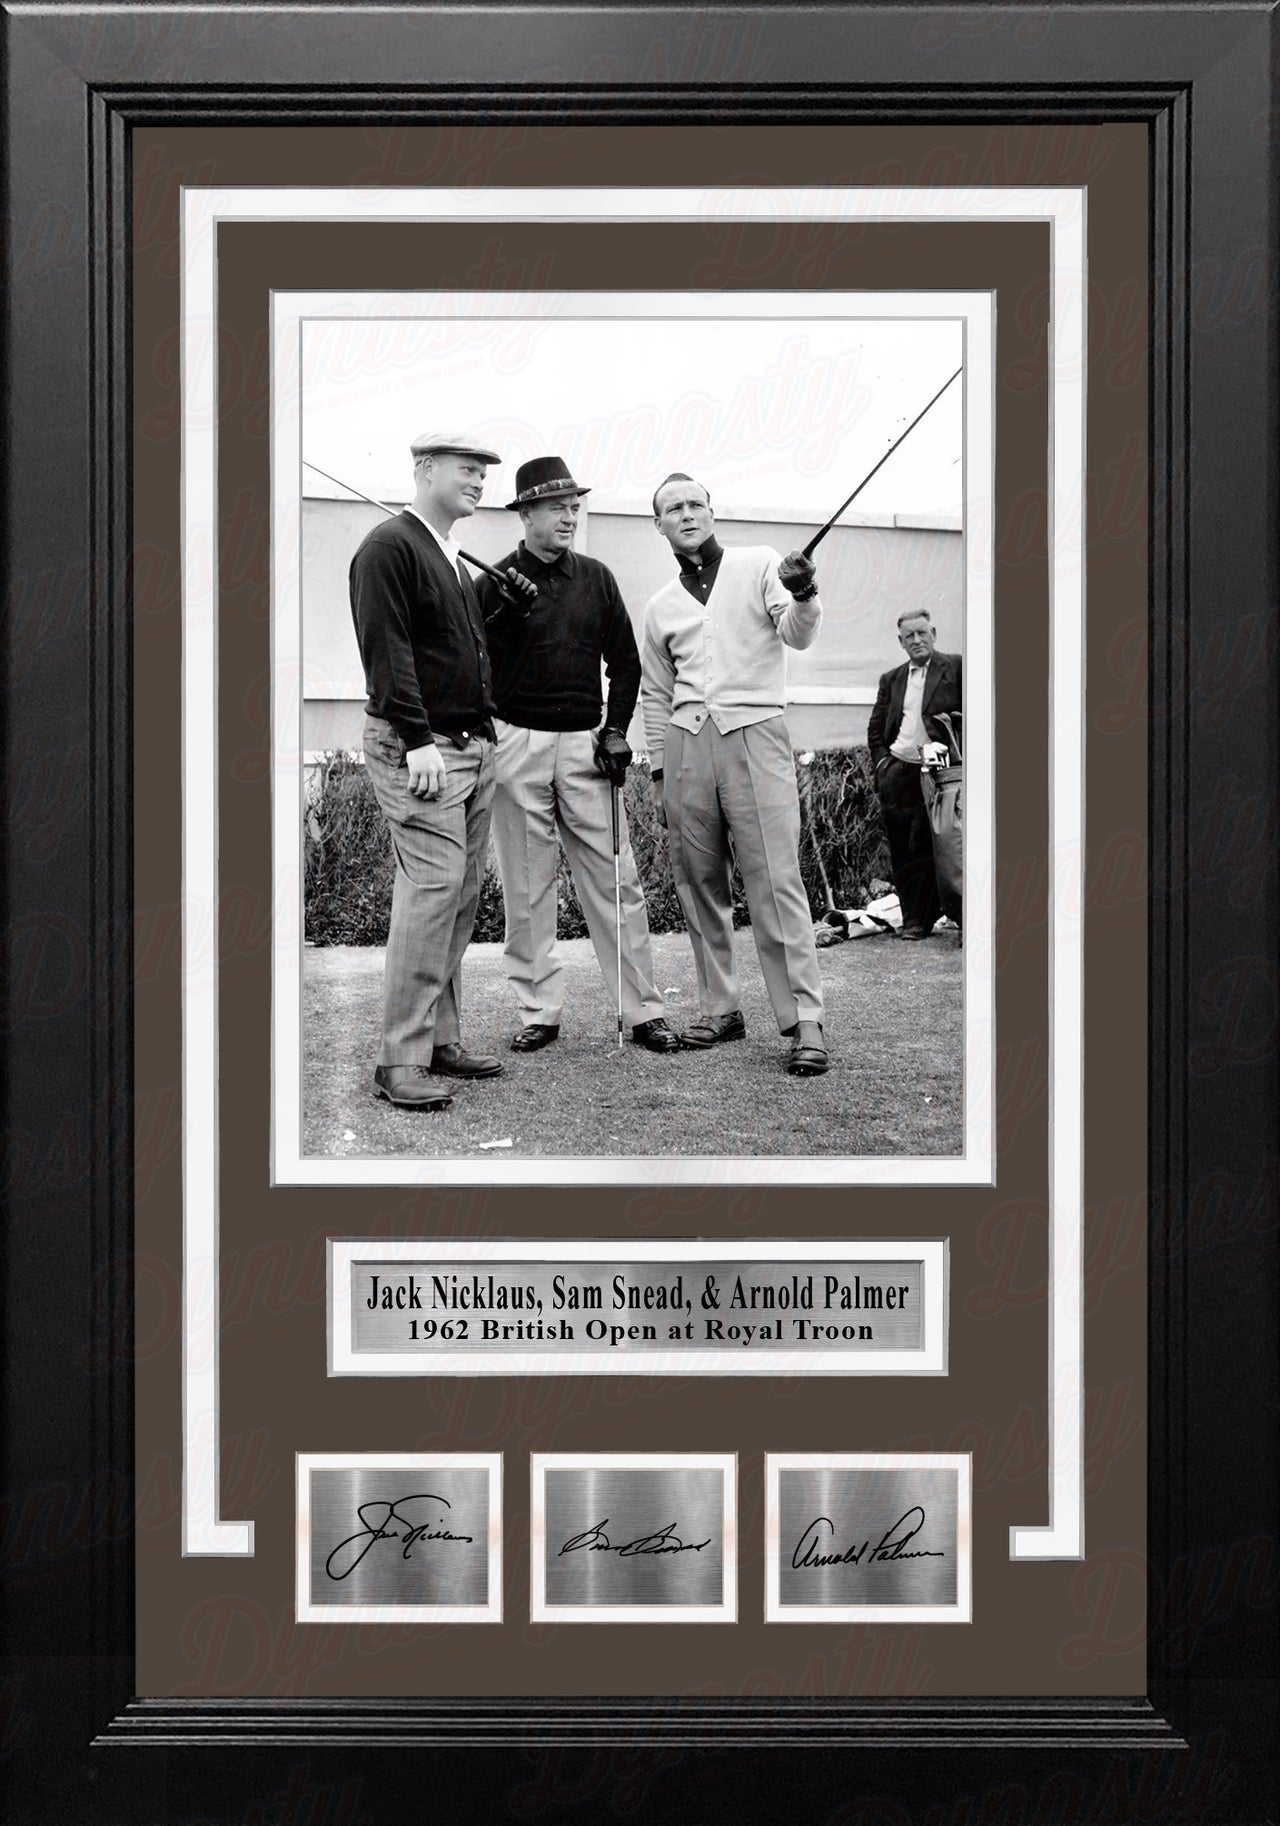 Jack Nicklaus, Sam Snead, & Arnold Palmer 8" x 10" Framed Golf Photo with Engraved Autographs - Dynasty Sports & Framing 